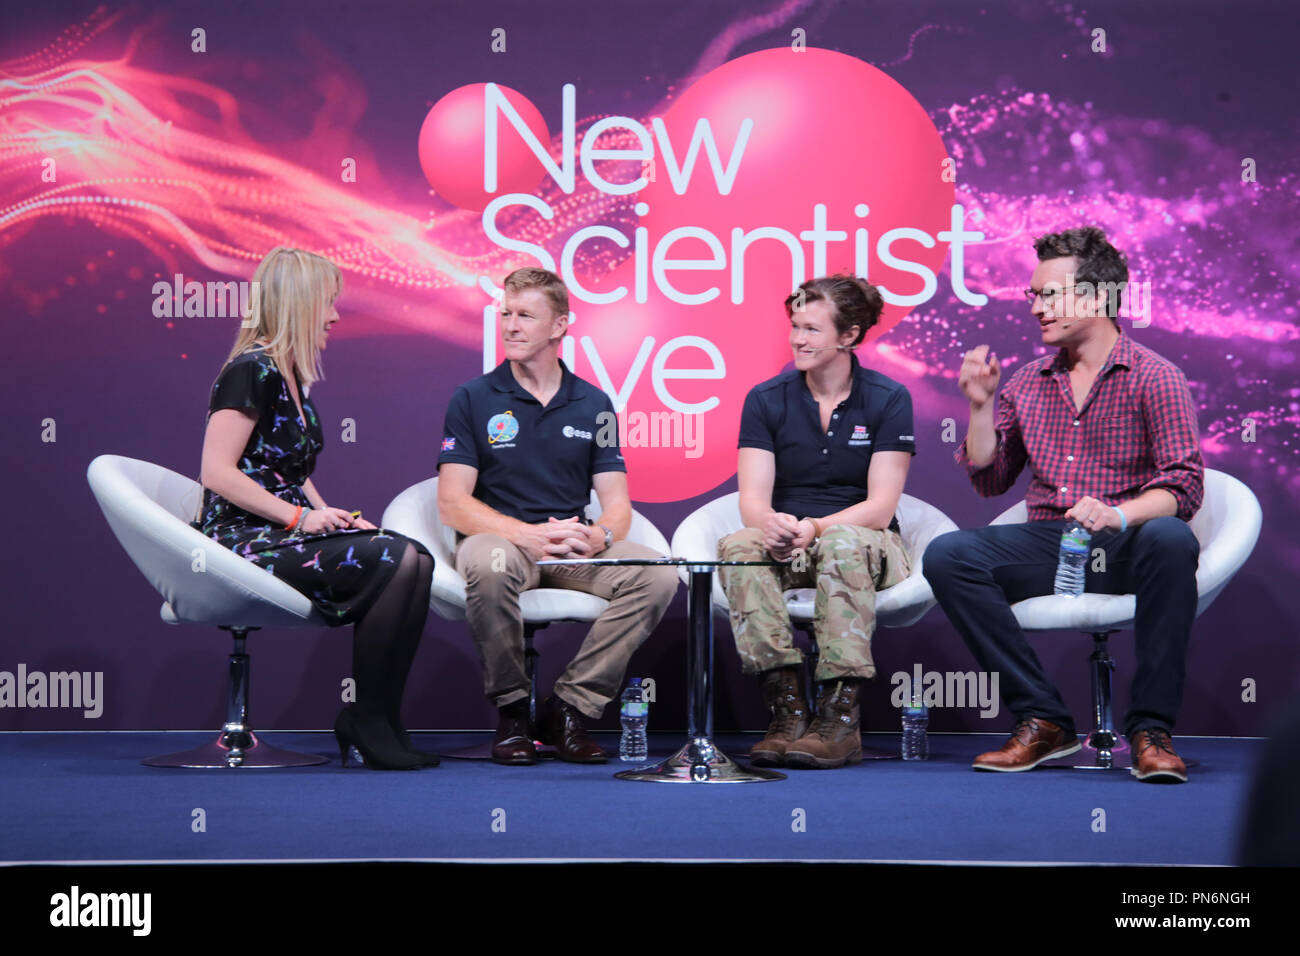 London 20 September 2018 New Scientis Live 2018 Main stage welcomed Tim Peake, European Space Agency (ESA) astronaut of British nationality. He finished his 186-day Principia mission working on the International Space Station for Expedition 46/47 when he landed back on Earth 18 June 2016. Tim has a background as a test pilot and a British Army Air Corps officer@Paul Quezada-Neiman/Alamy Live News Stock Photo